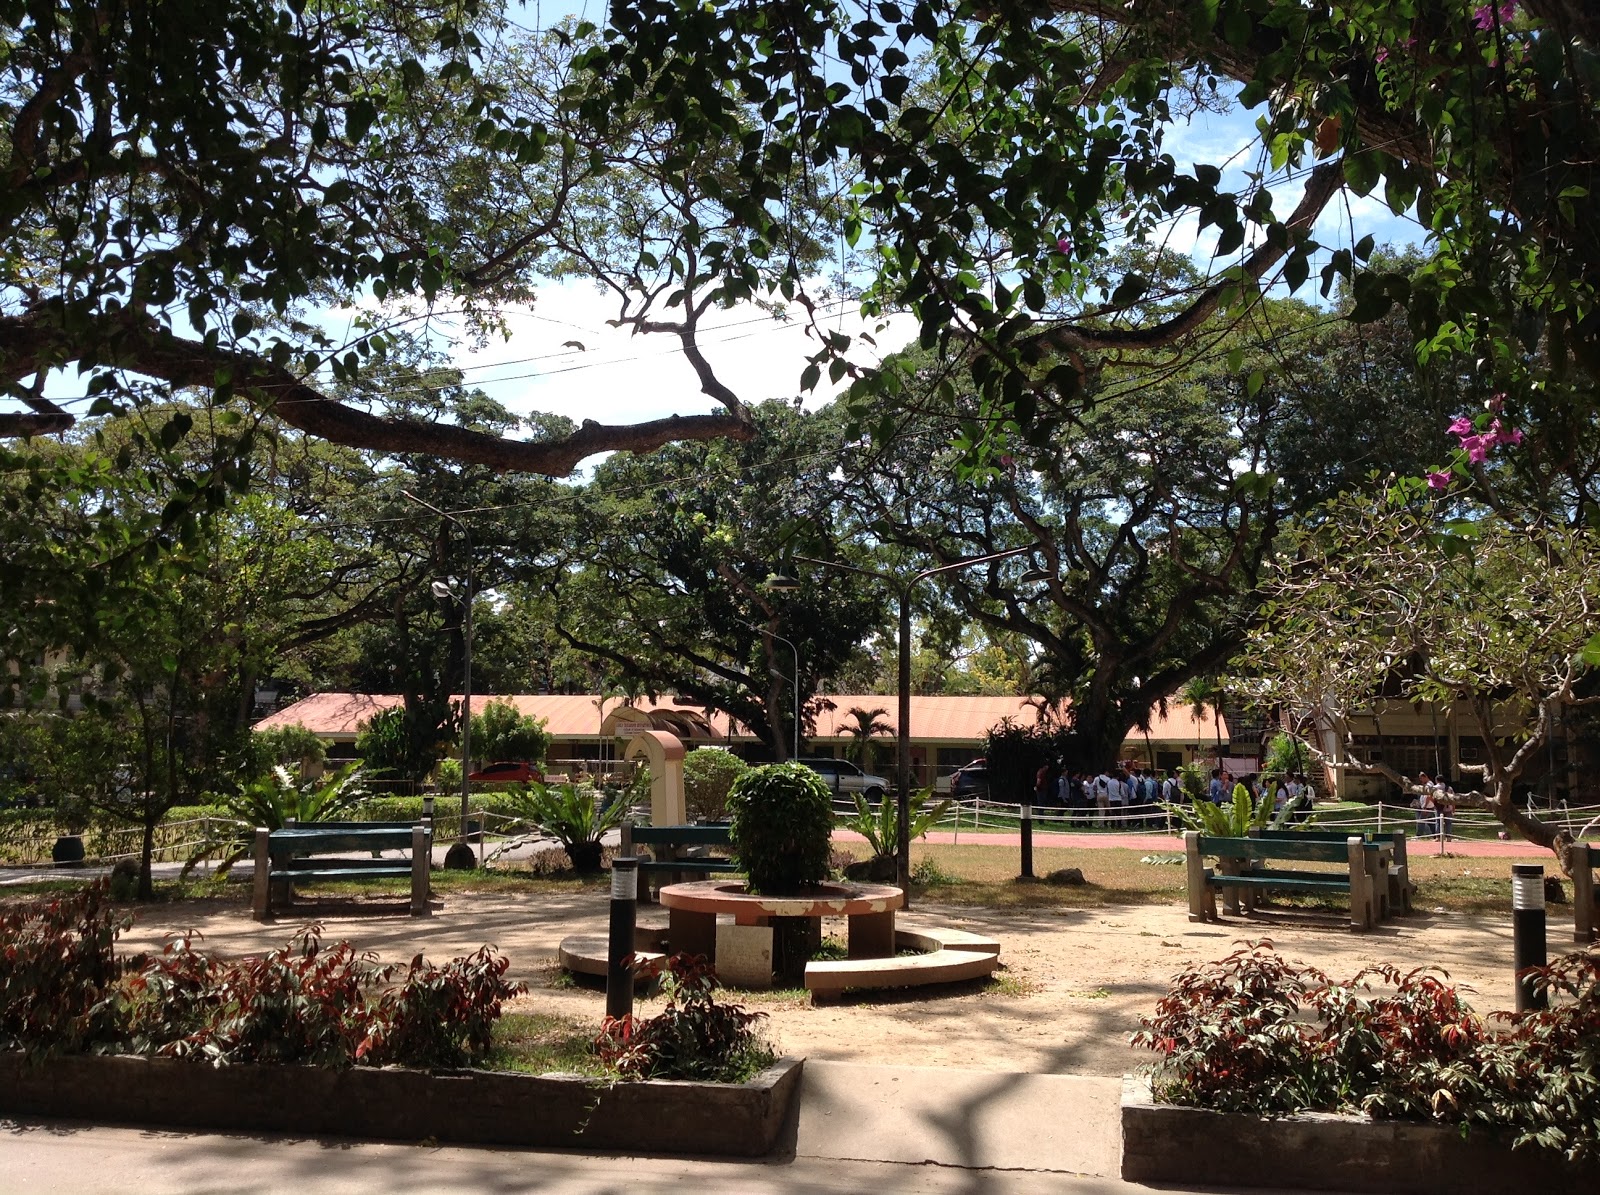 Silliman’s campus grounds provide a respite for students shuttling between classes